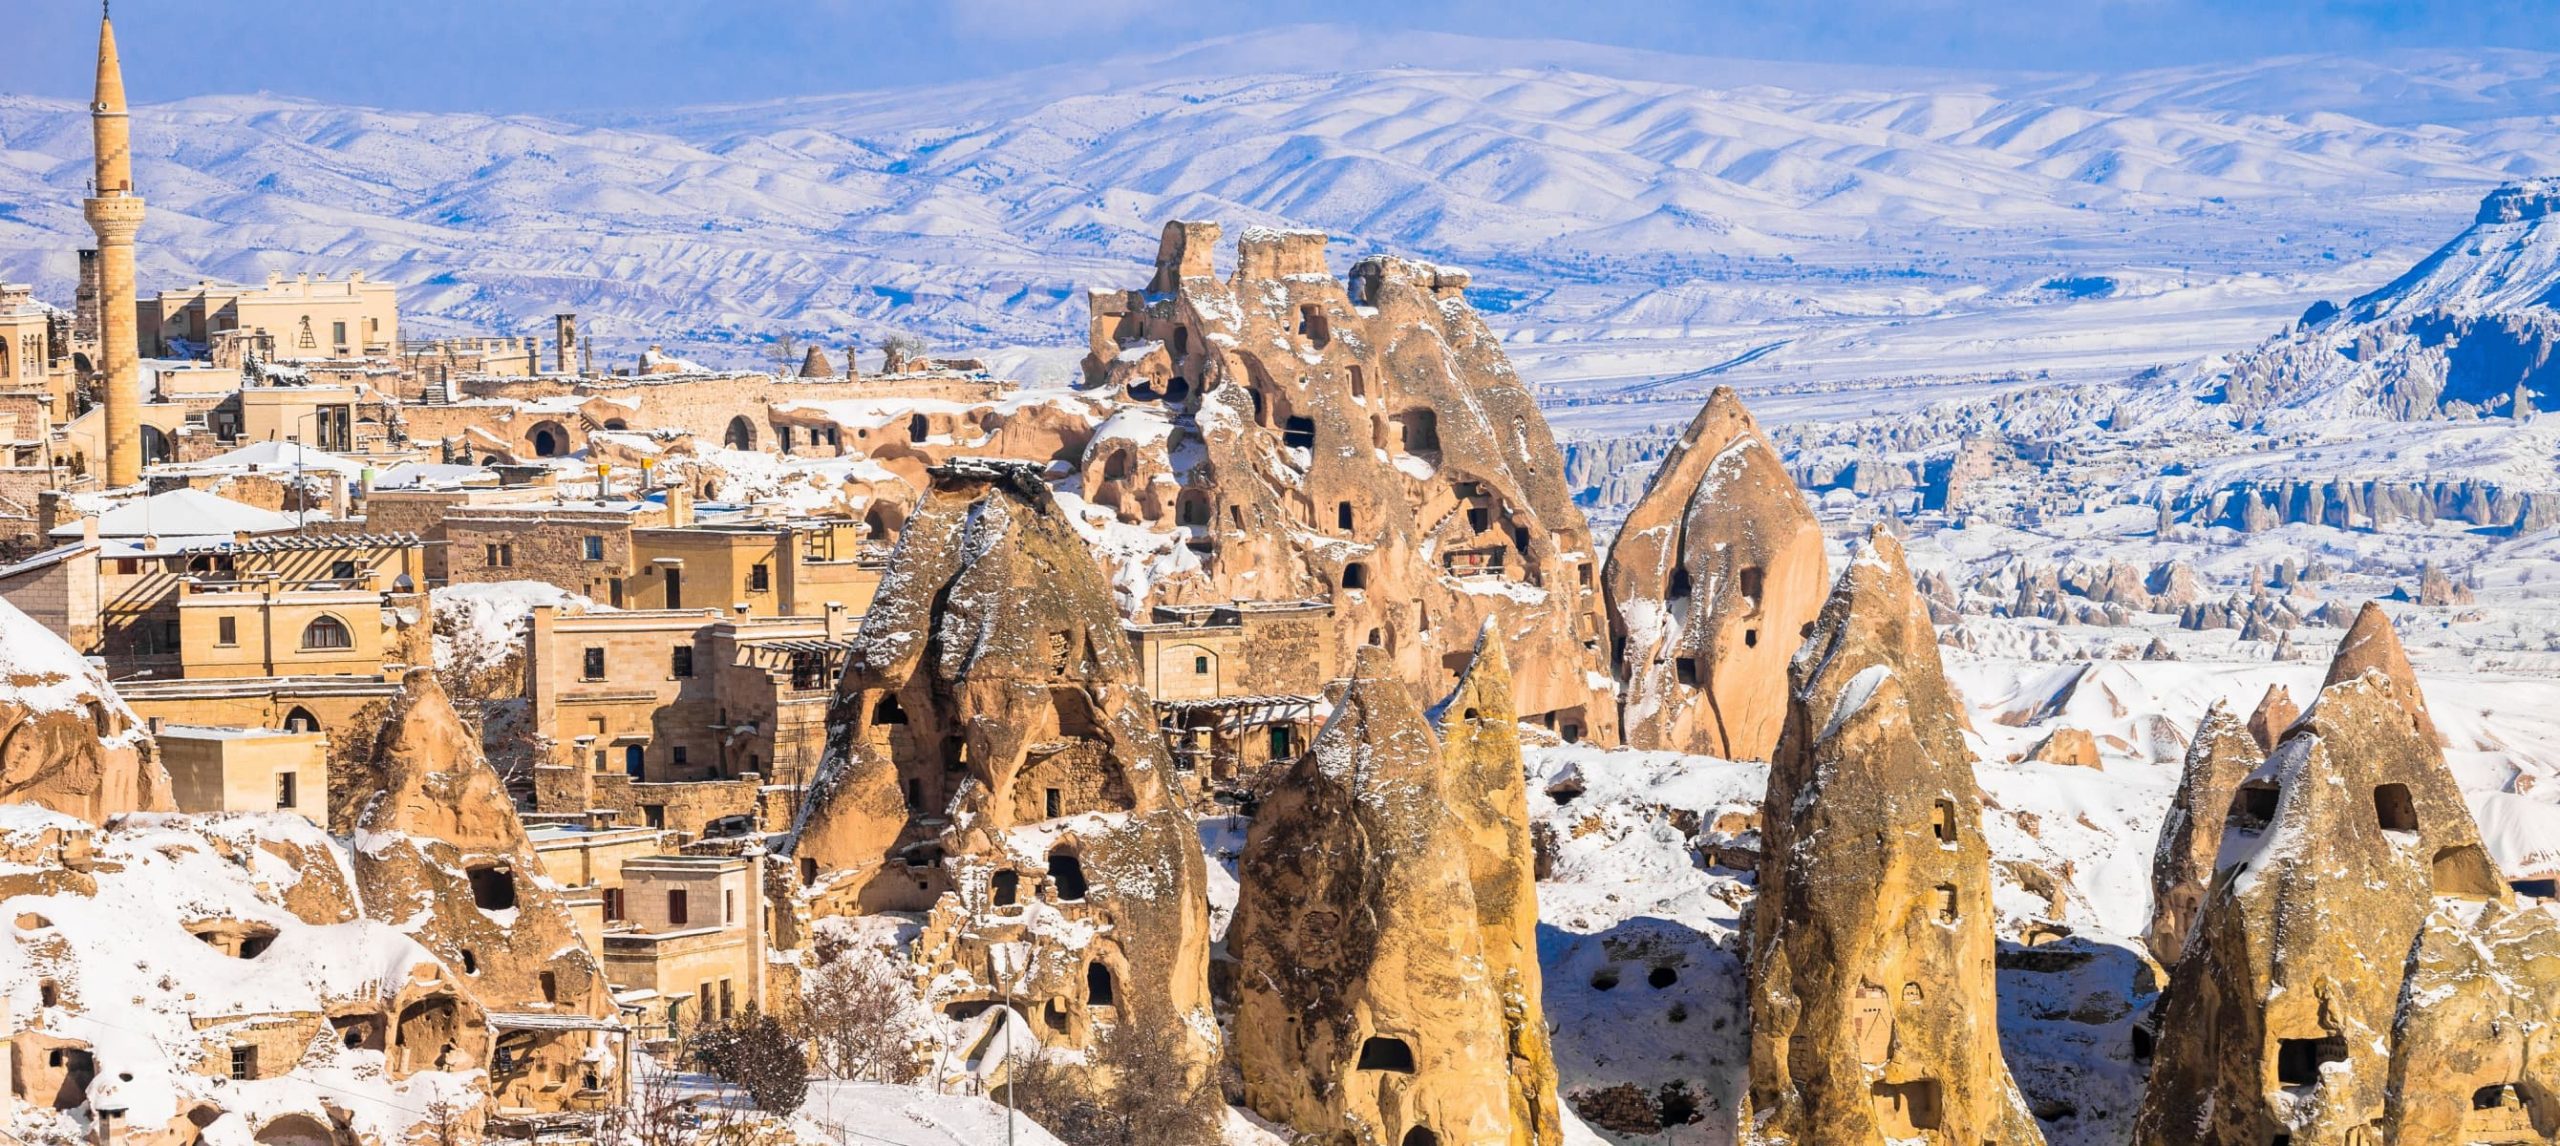 8 Historical Attractions In Turkey That You Must See